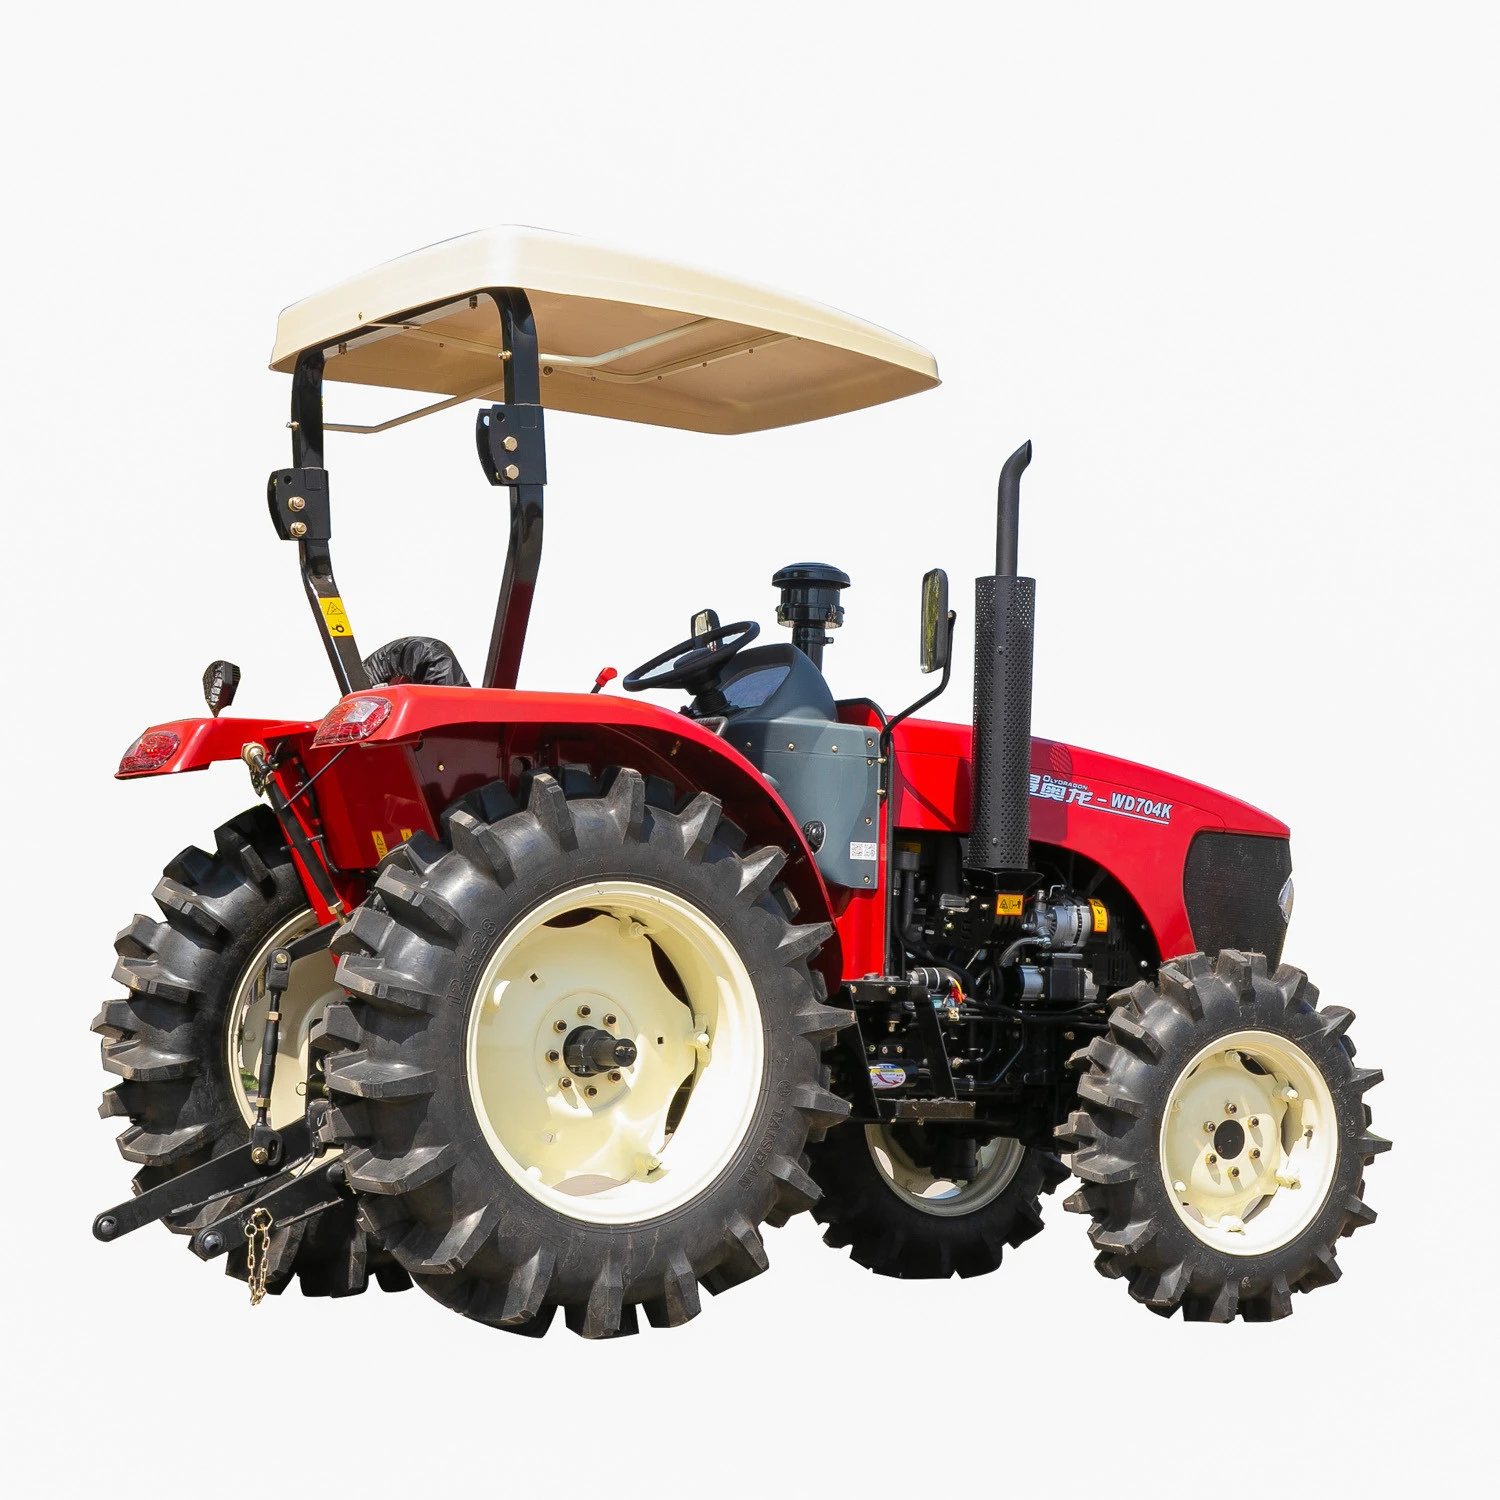 FMWORLD Tractor 75hp 4wd Red Power Time Engine Sales Wheel Color Gear Accept Container Origin